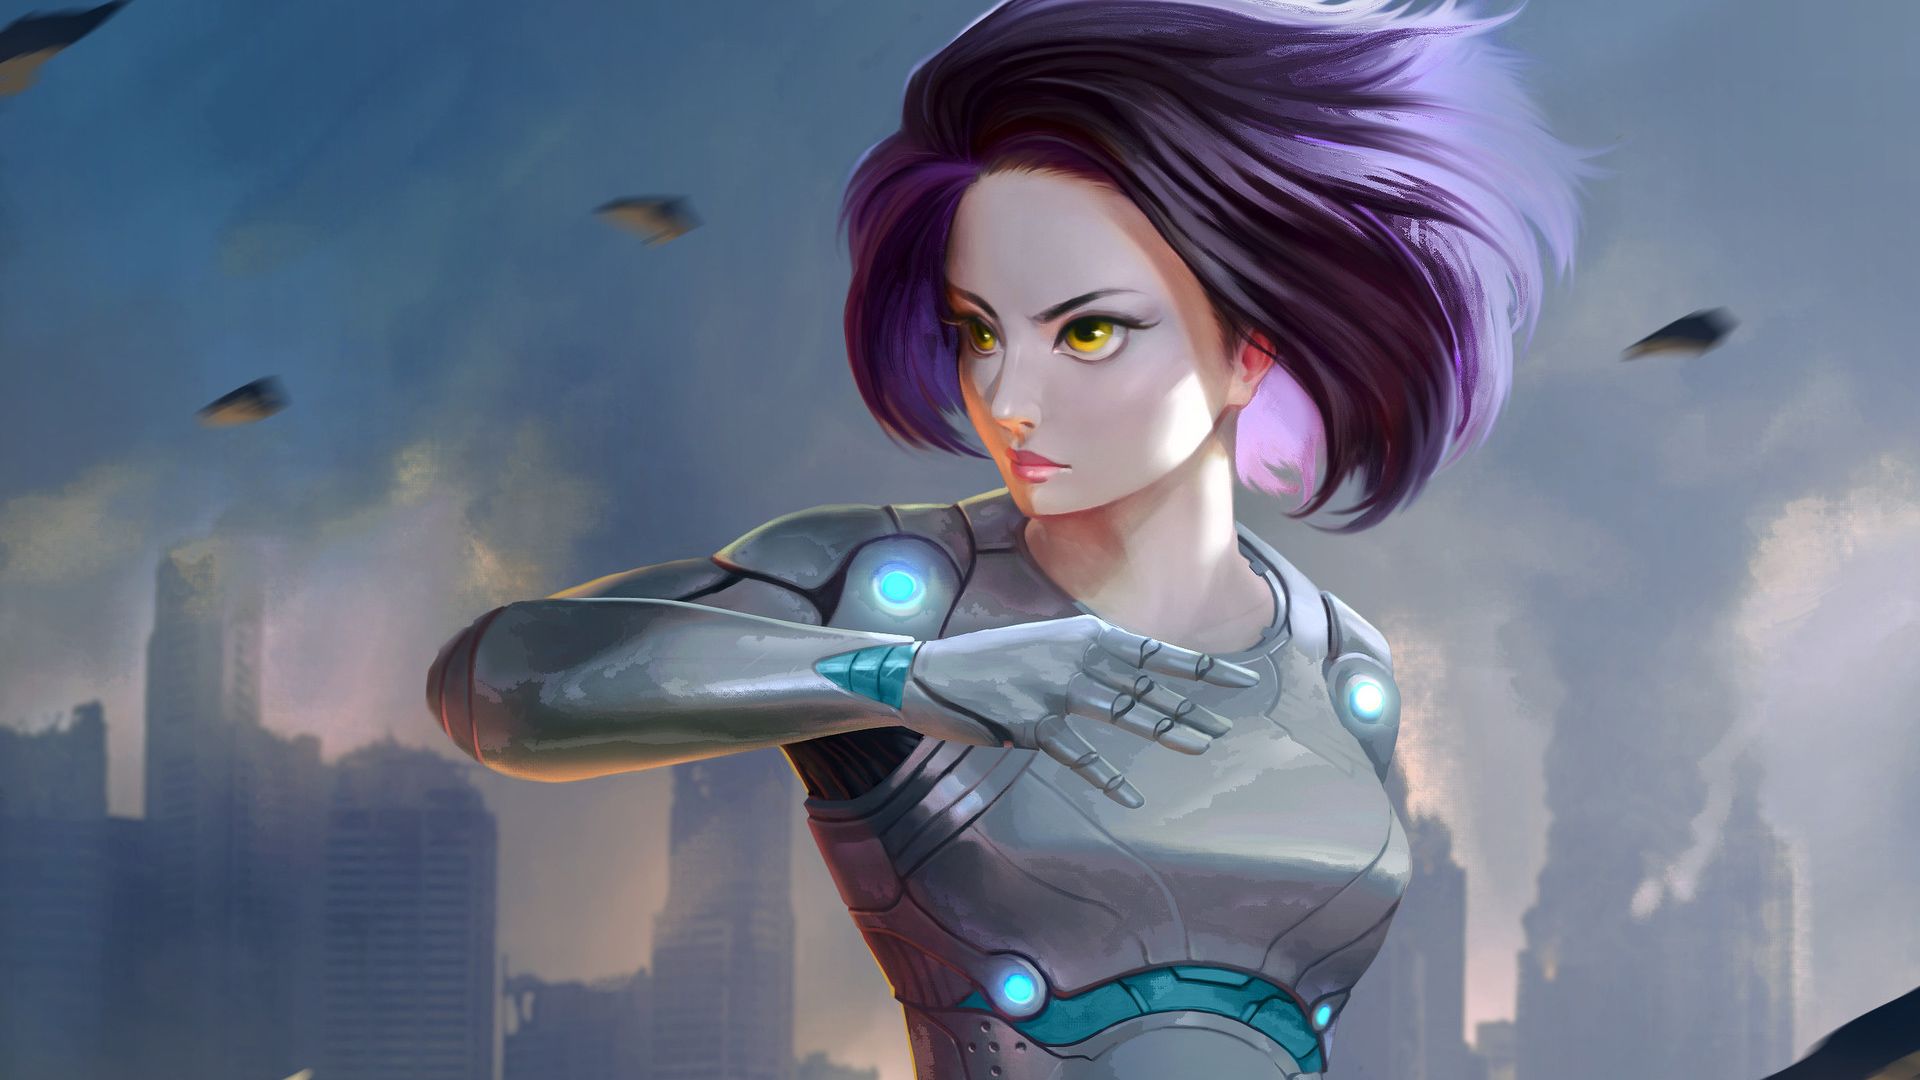 Alita Battle Angel 2 Trailer and Release Date in 2023 Confirmed by Actress Rosa Salazar